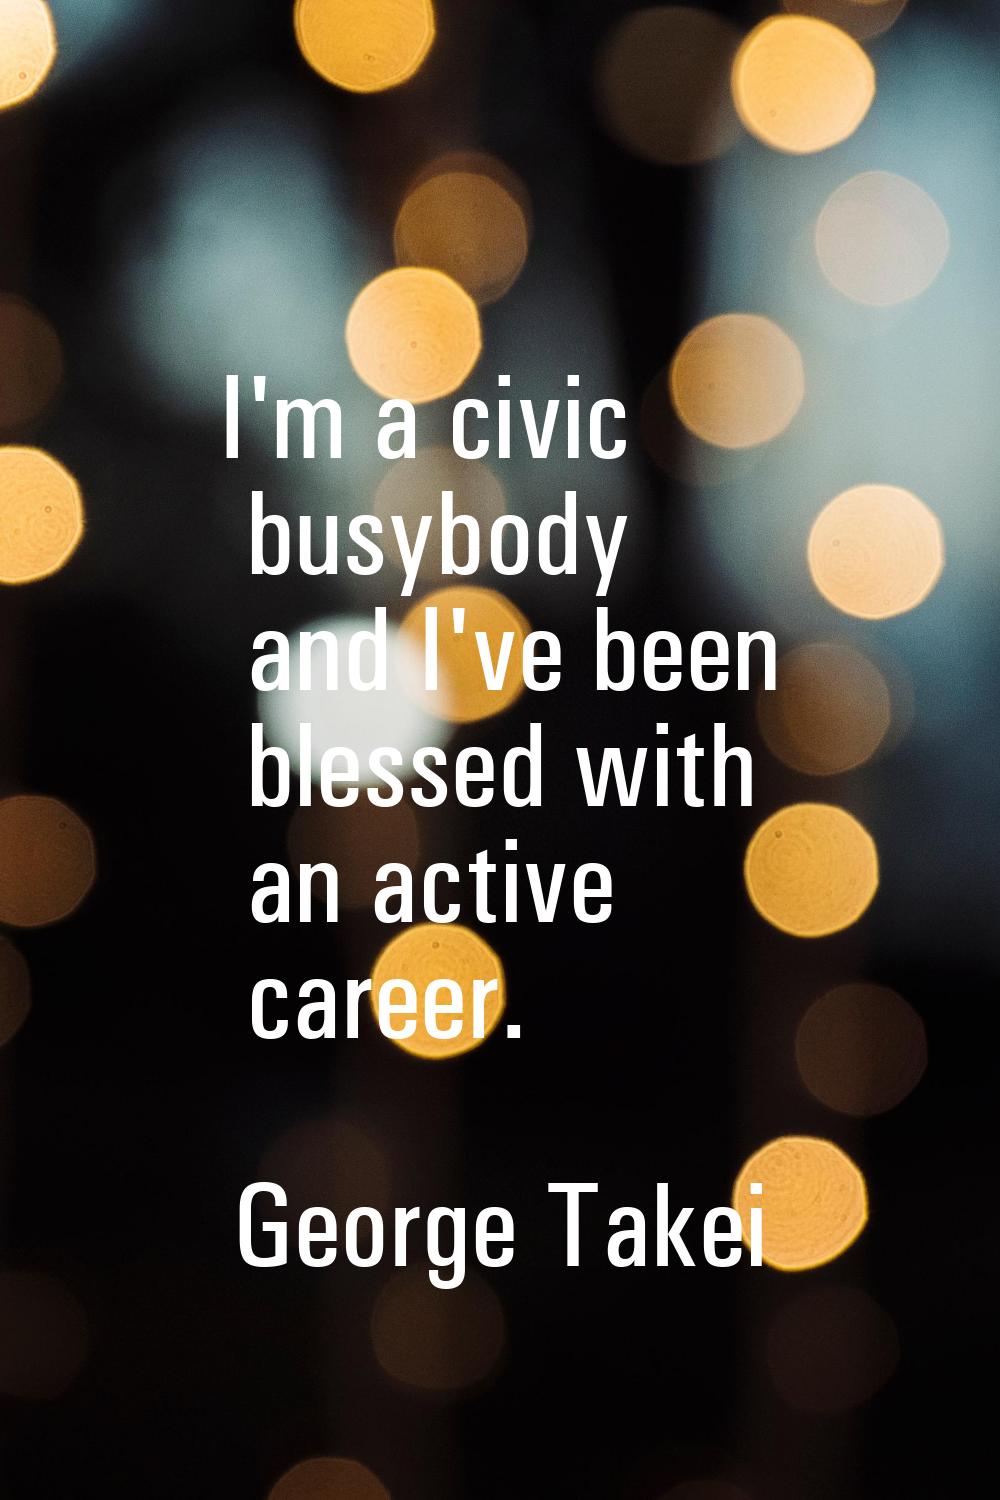 I'm a civic busybody and I've been blessed with an active career.